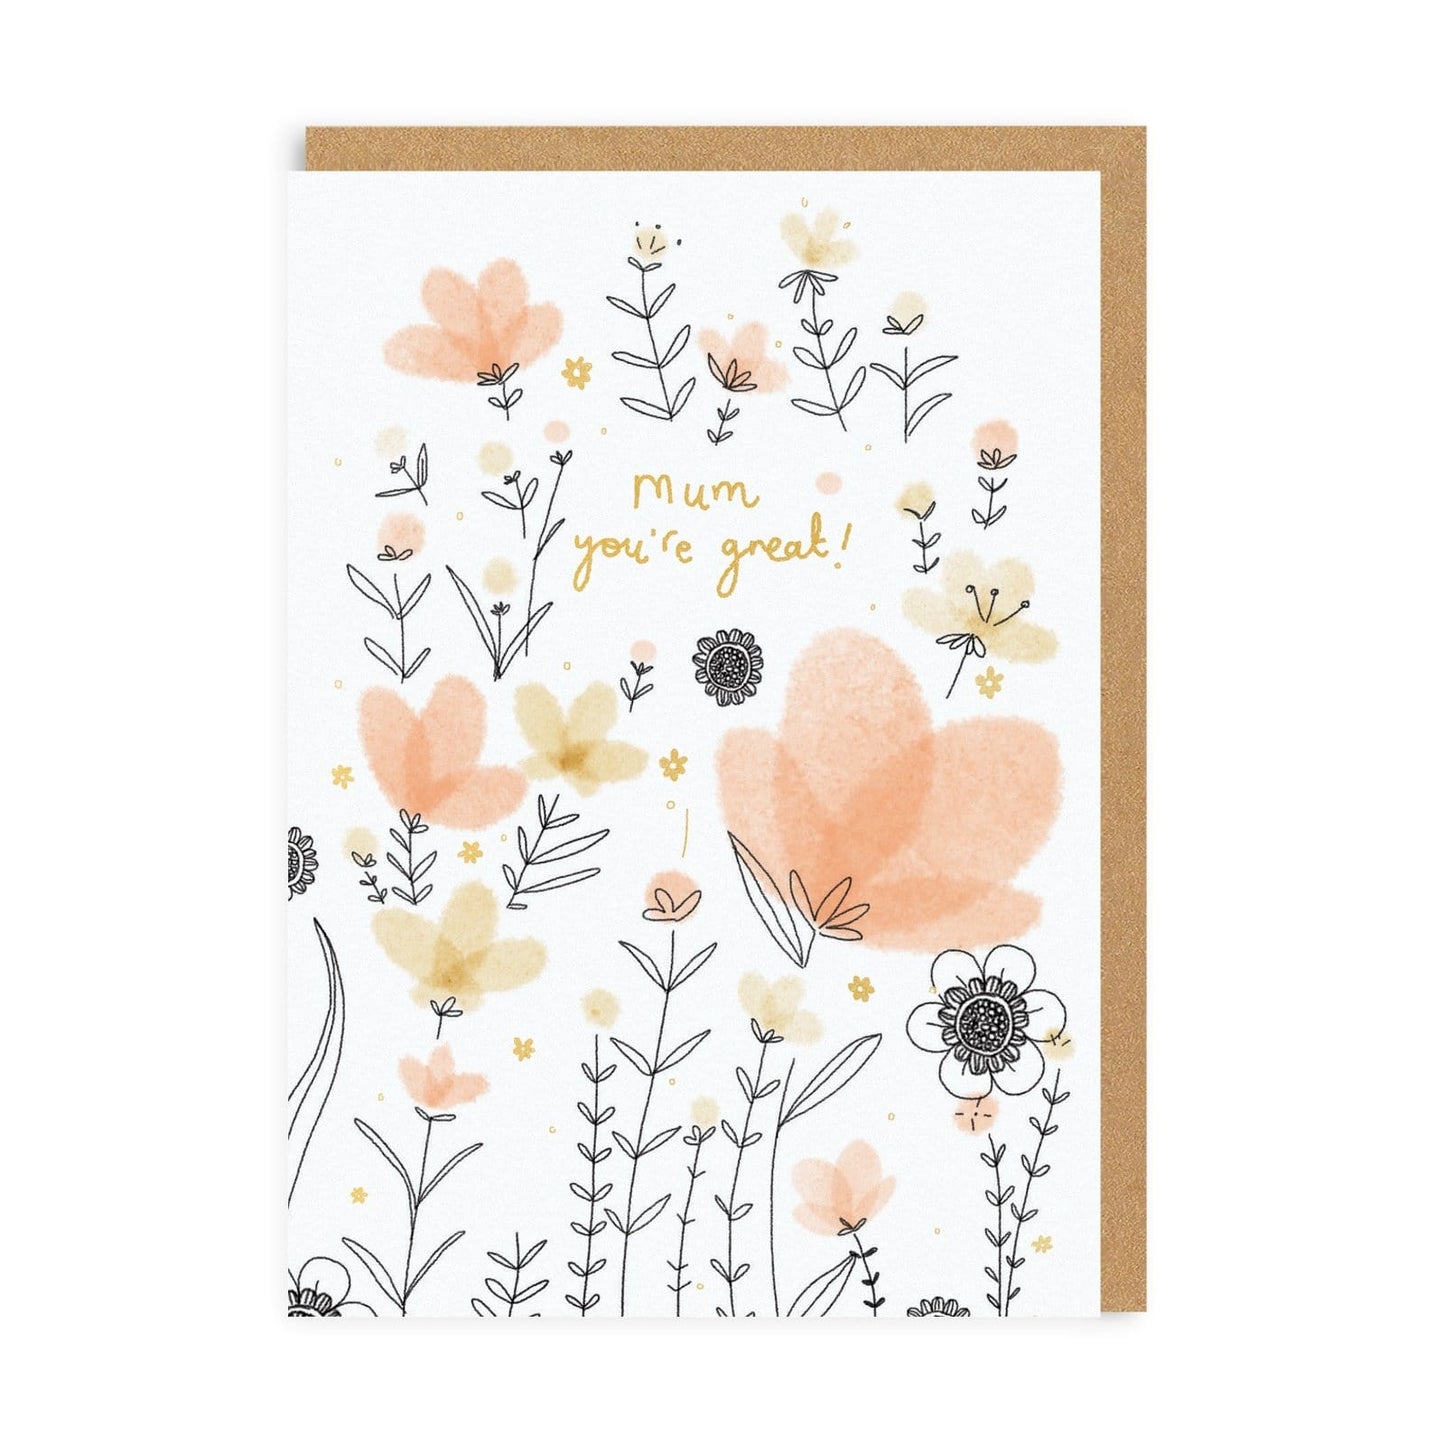 Mum You're Great! Greeting Card